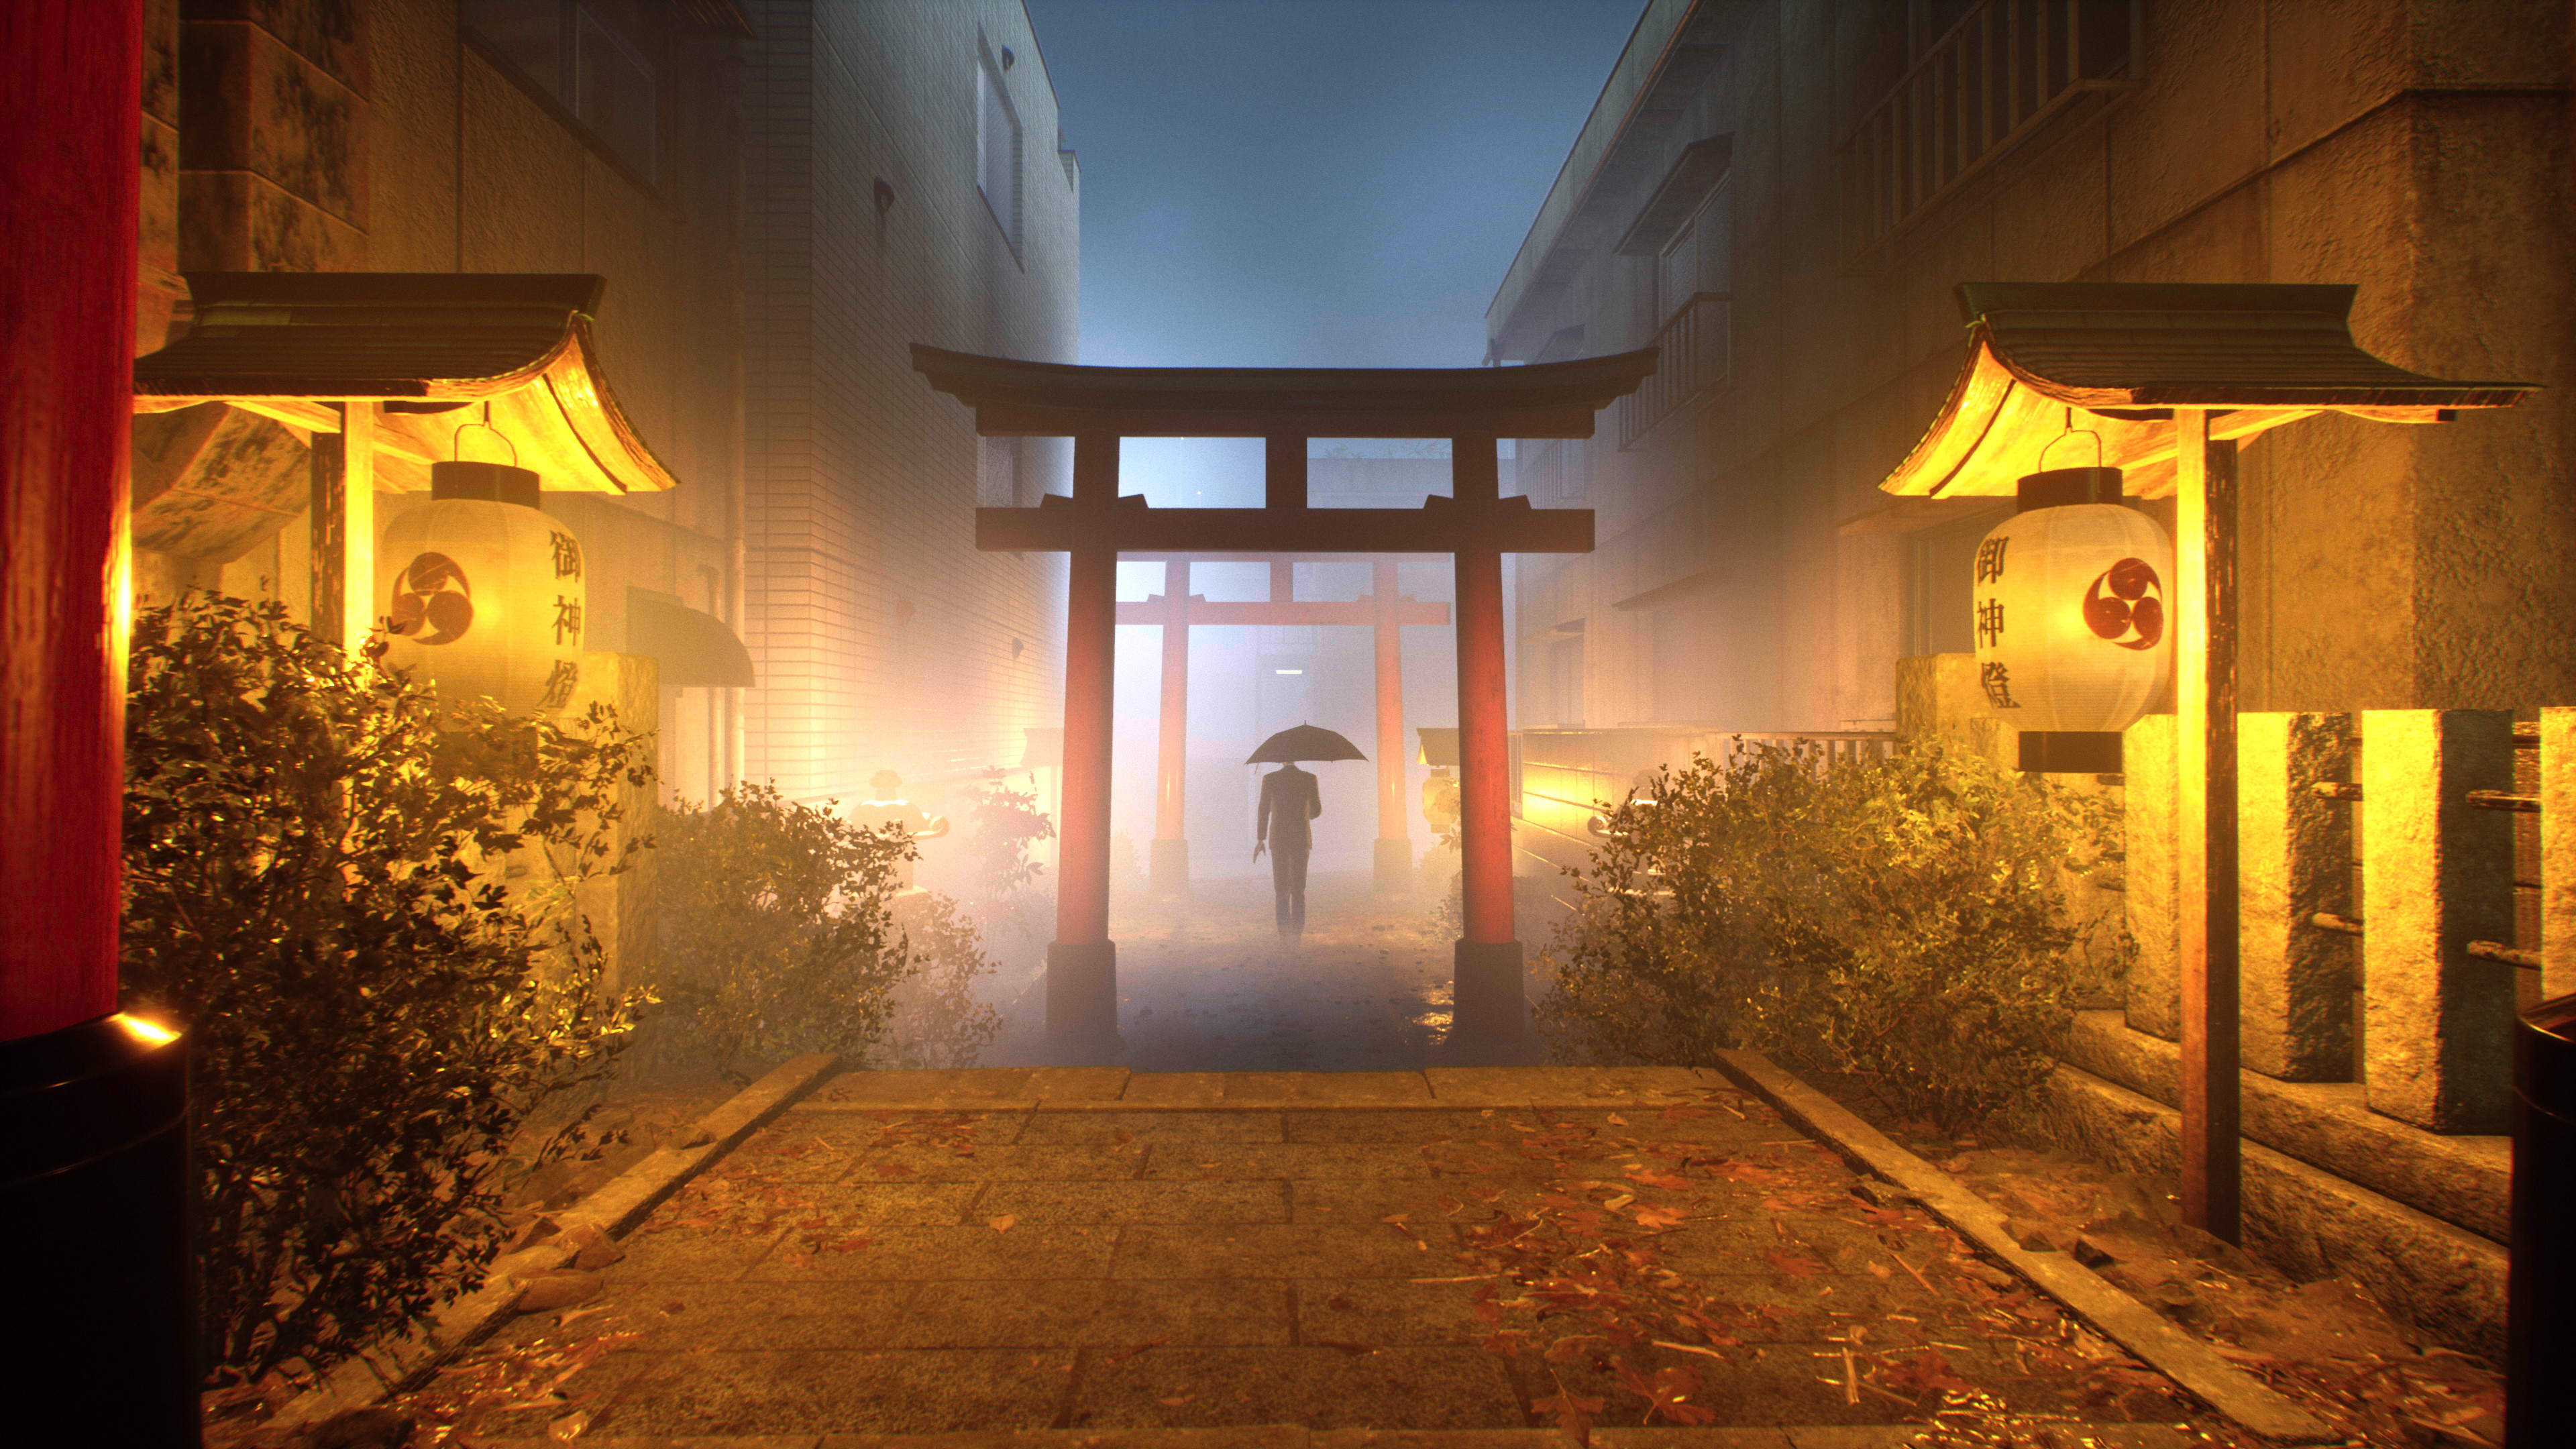 Video Game GhostWire: Tokyo HD Wallpaper | Background Image